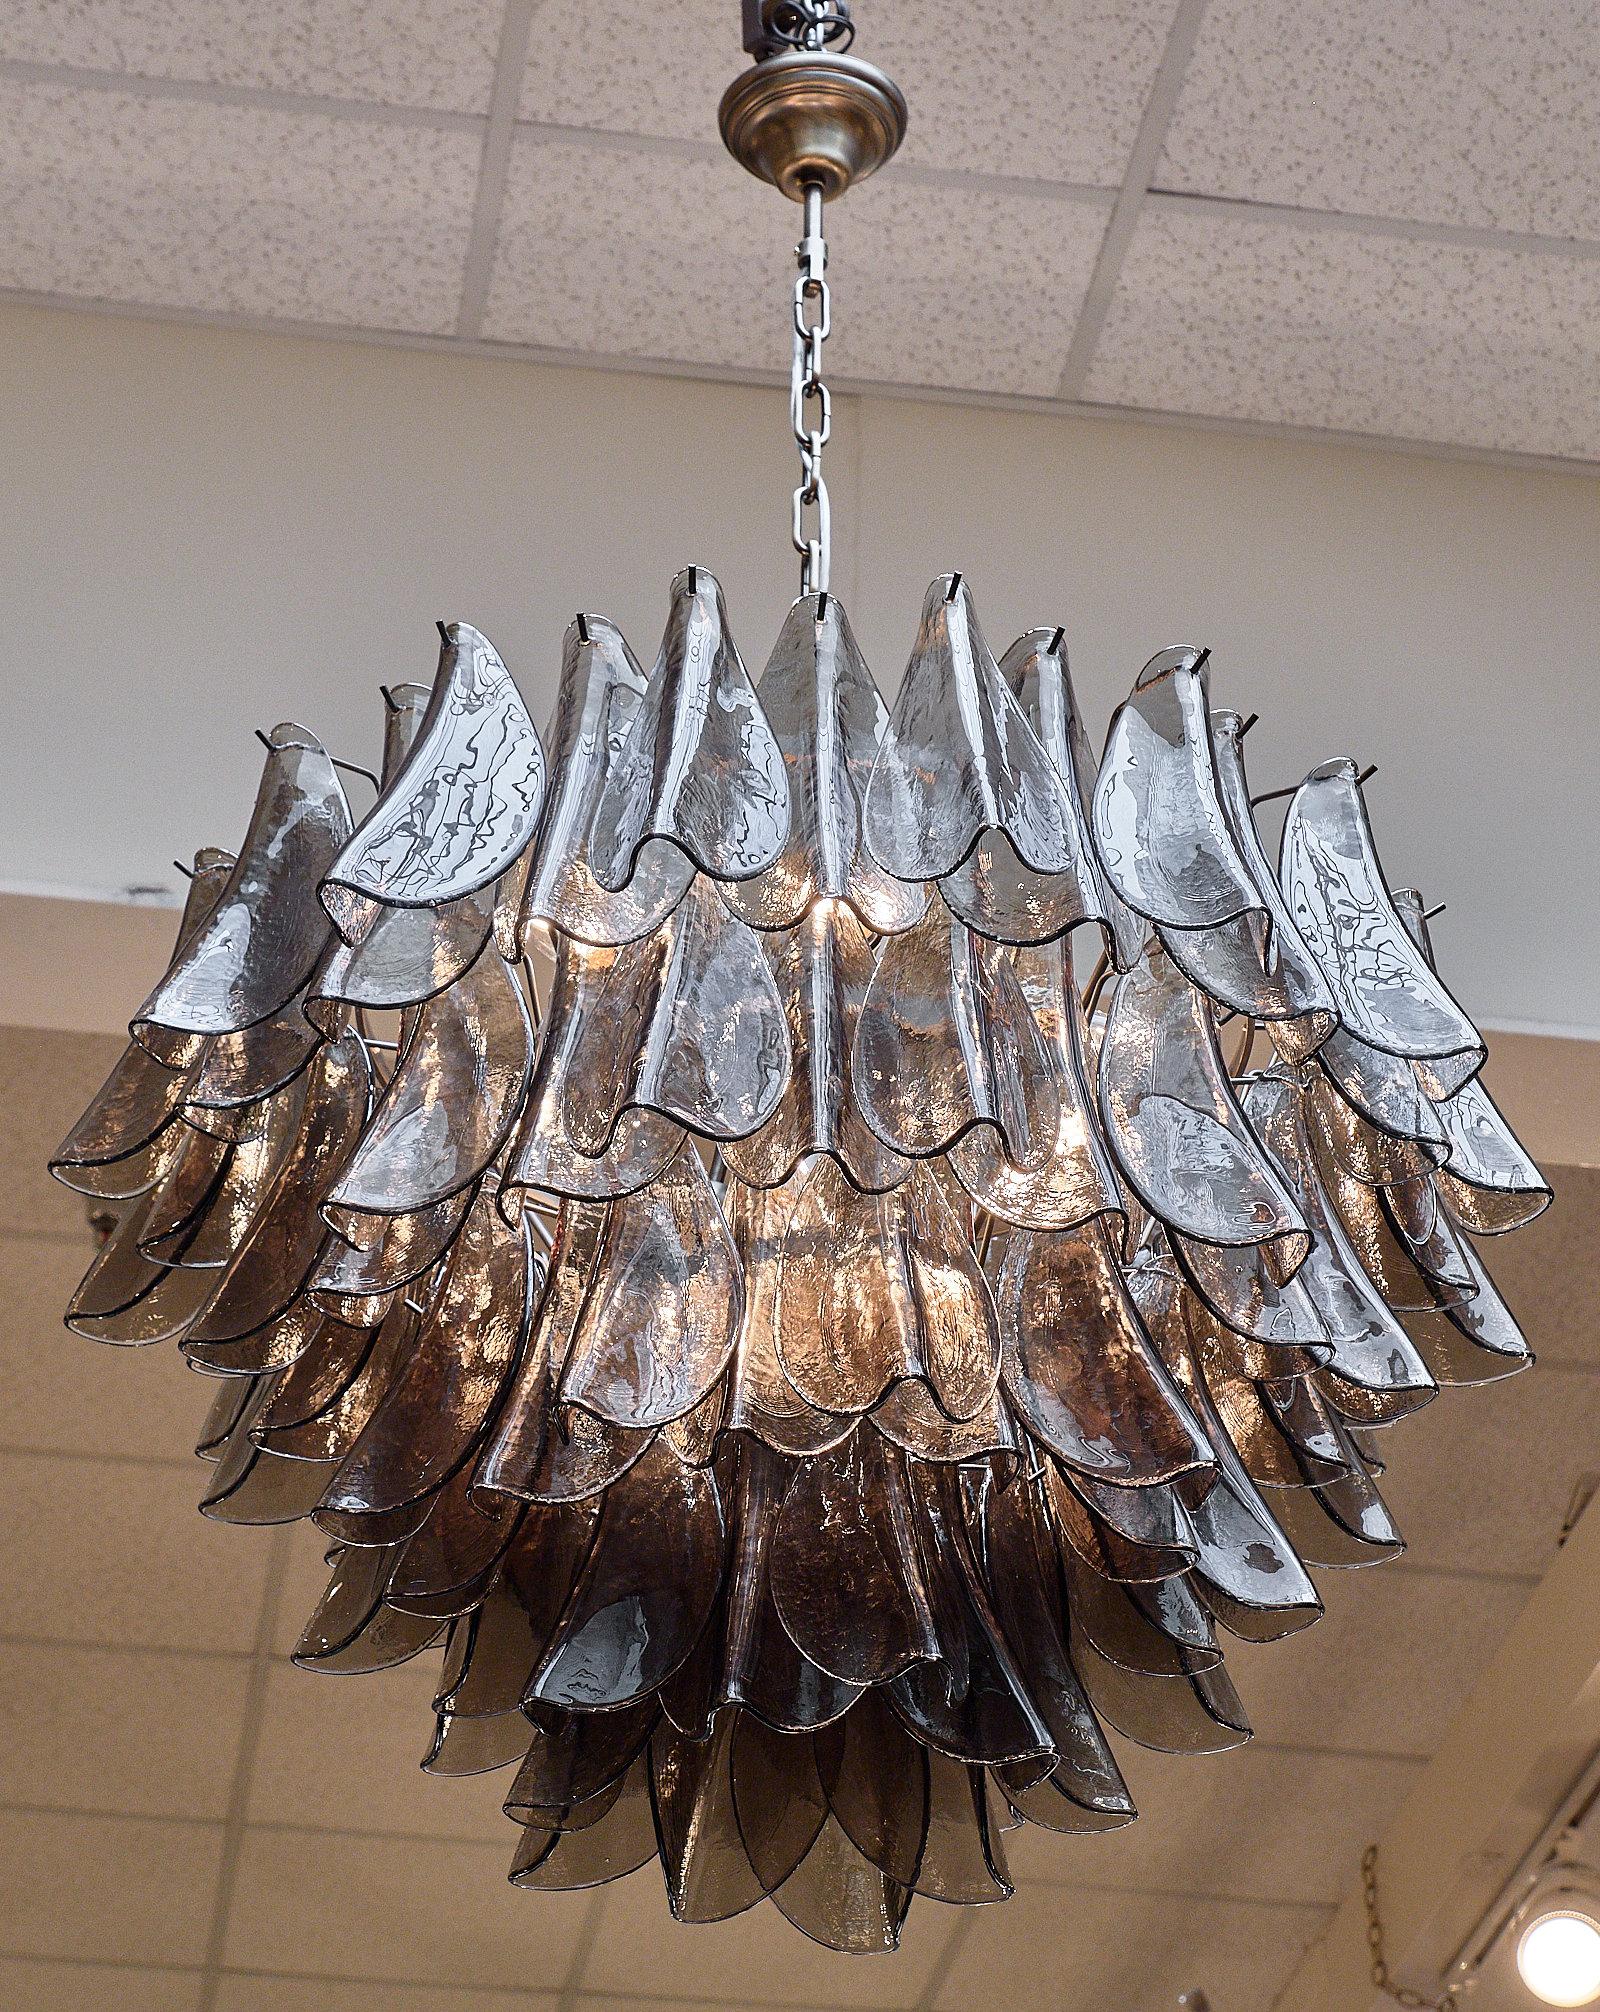 A stunning Italian Murano glass “foglie” chandelier with smoked glass leaf shaped components. We love the layered effect of the handblown glass and the light coming through the smoked glass. This fixture is newly wired to fit US standards.

This